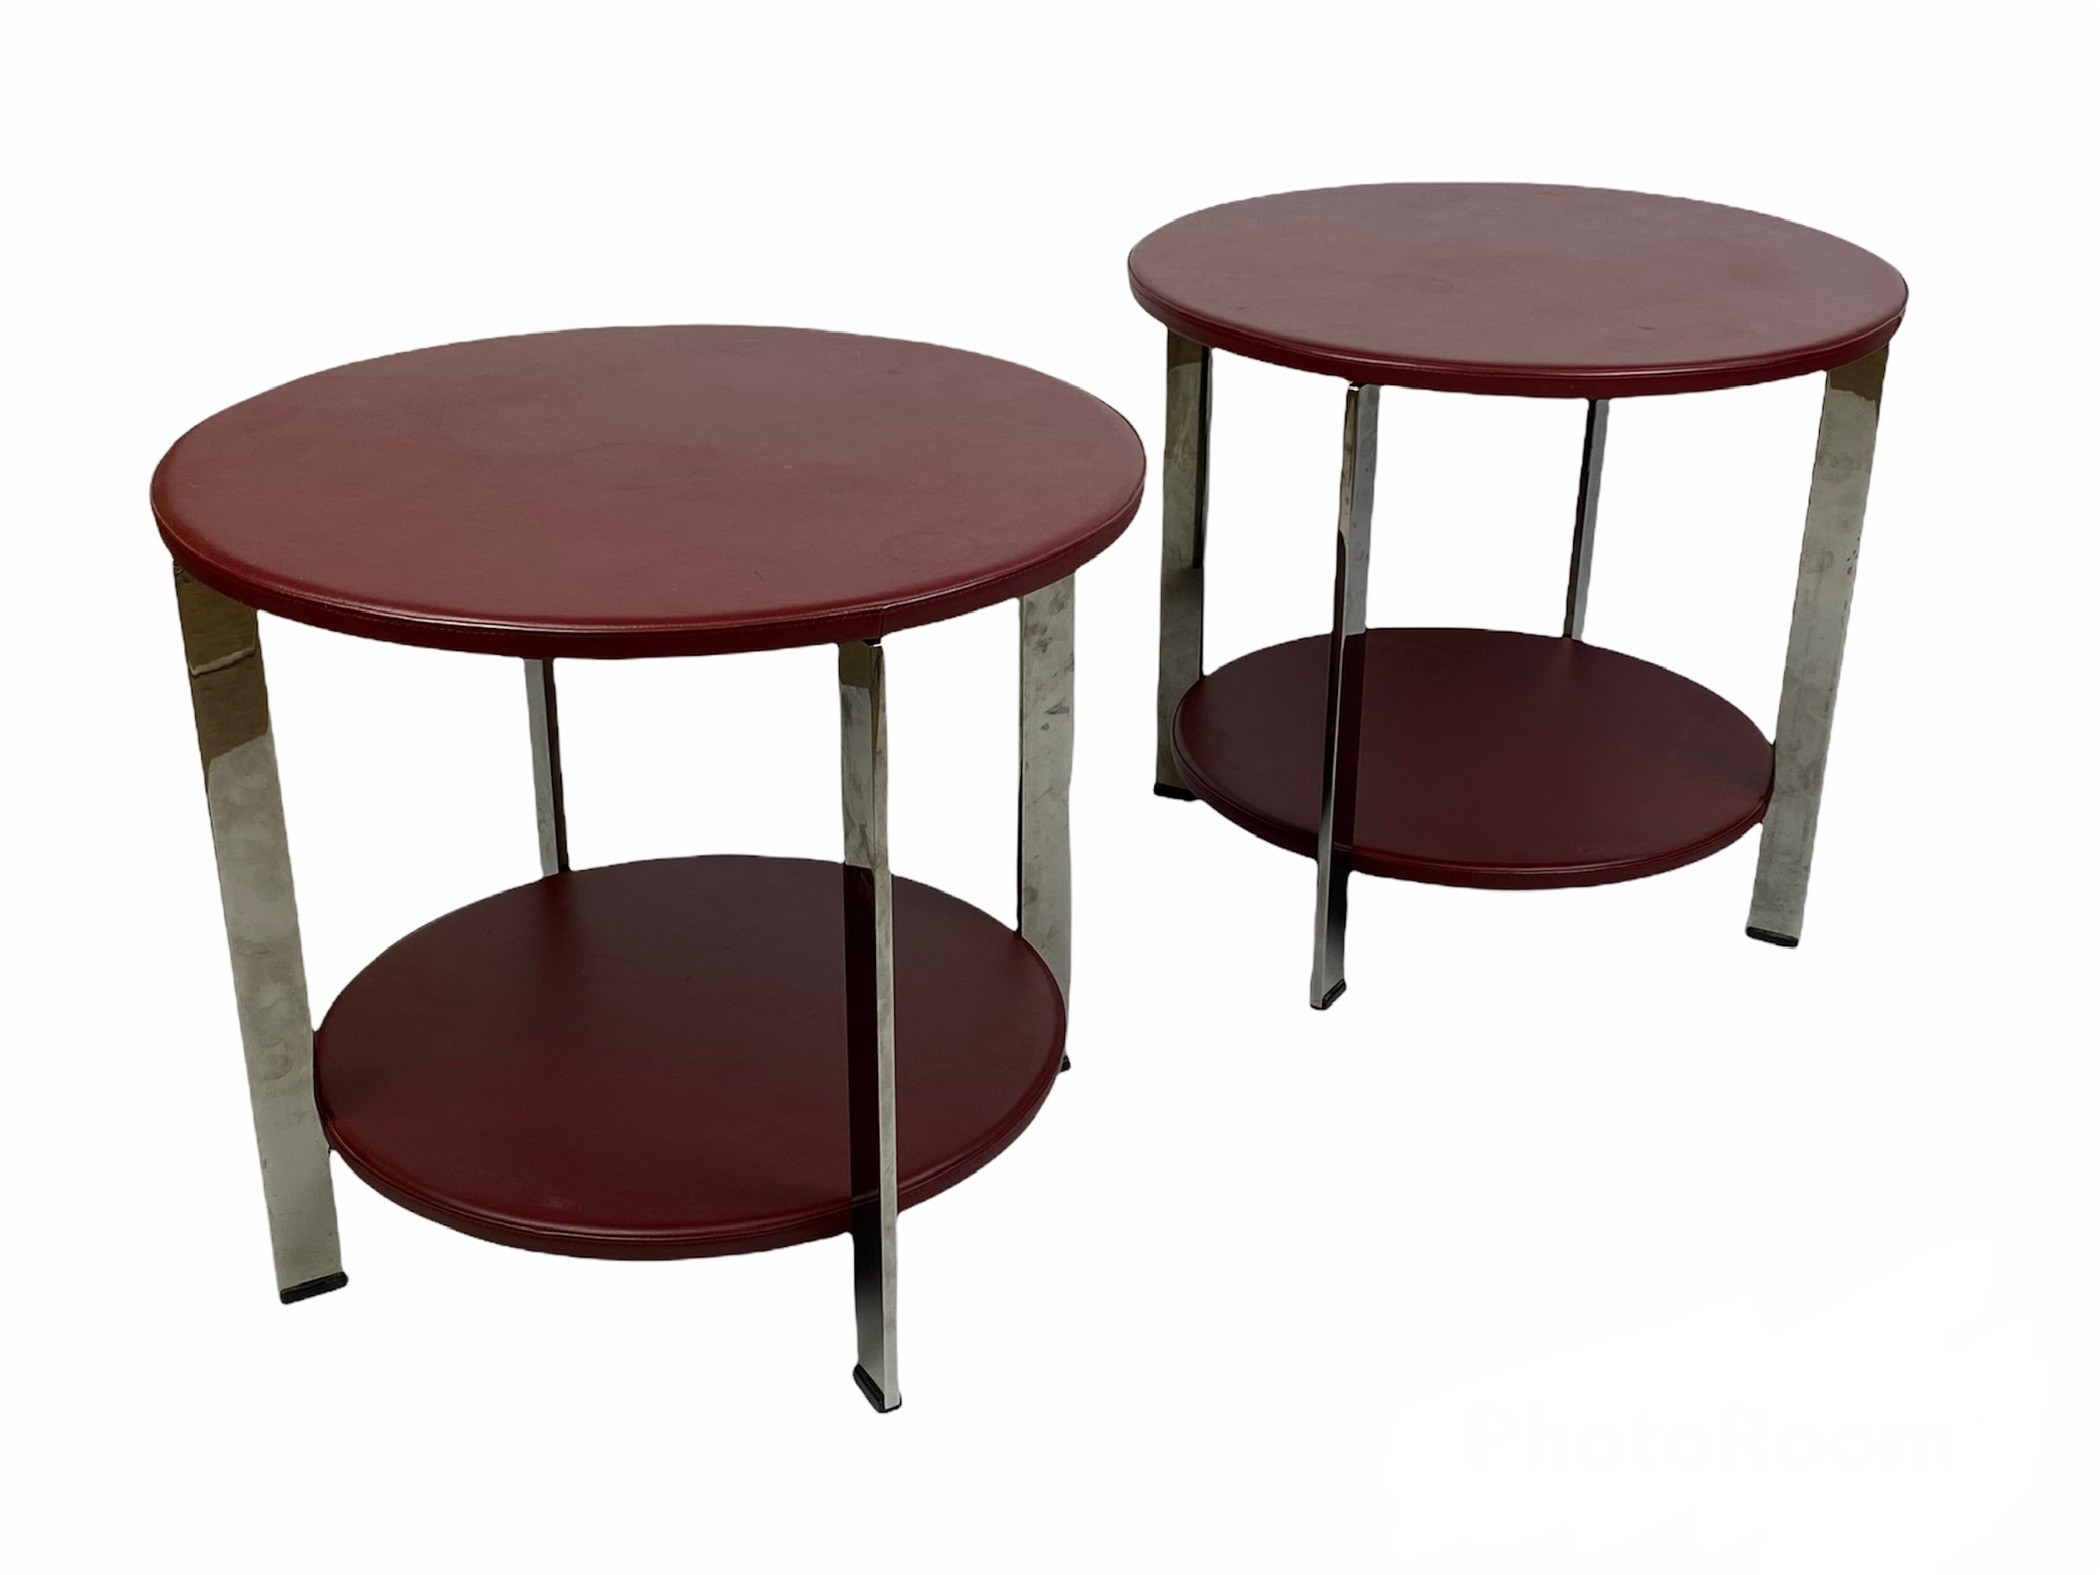 POLTRONA FRAU REGOLO SIDE TABLES, a pair, by Carlo Colombo, leather and polished metal, 49cm H x